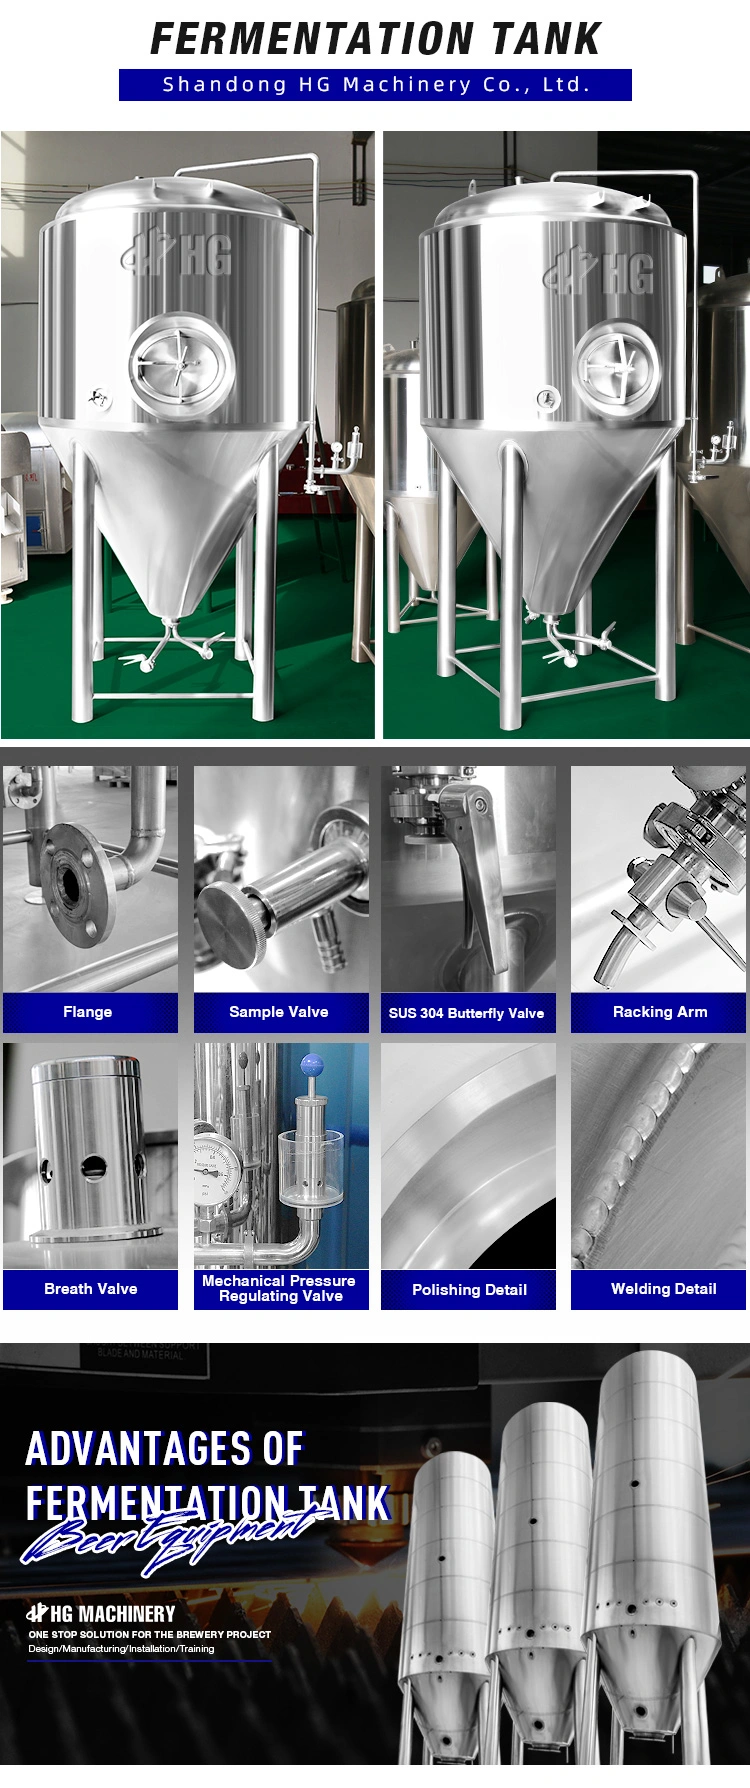 2000L 5000L 10000L Craft Beer Fermenting Equipment Large Stainless Steel 304 Conical Beer Fermenter/Storage Tanks